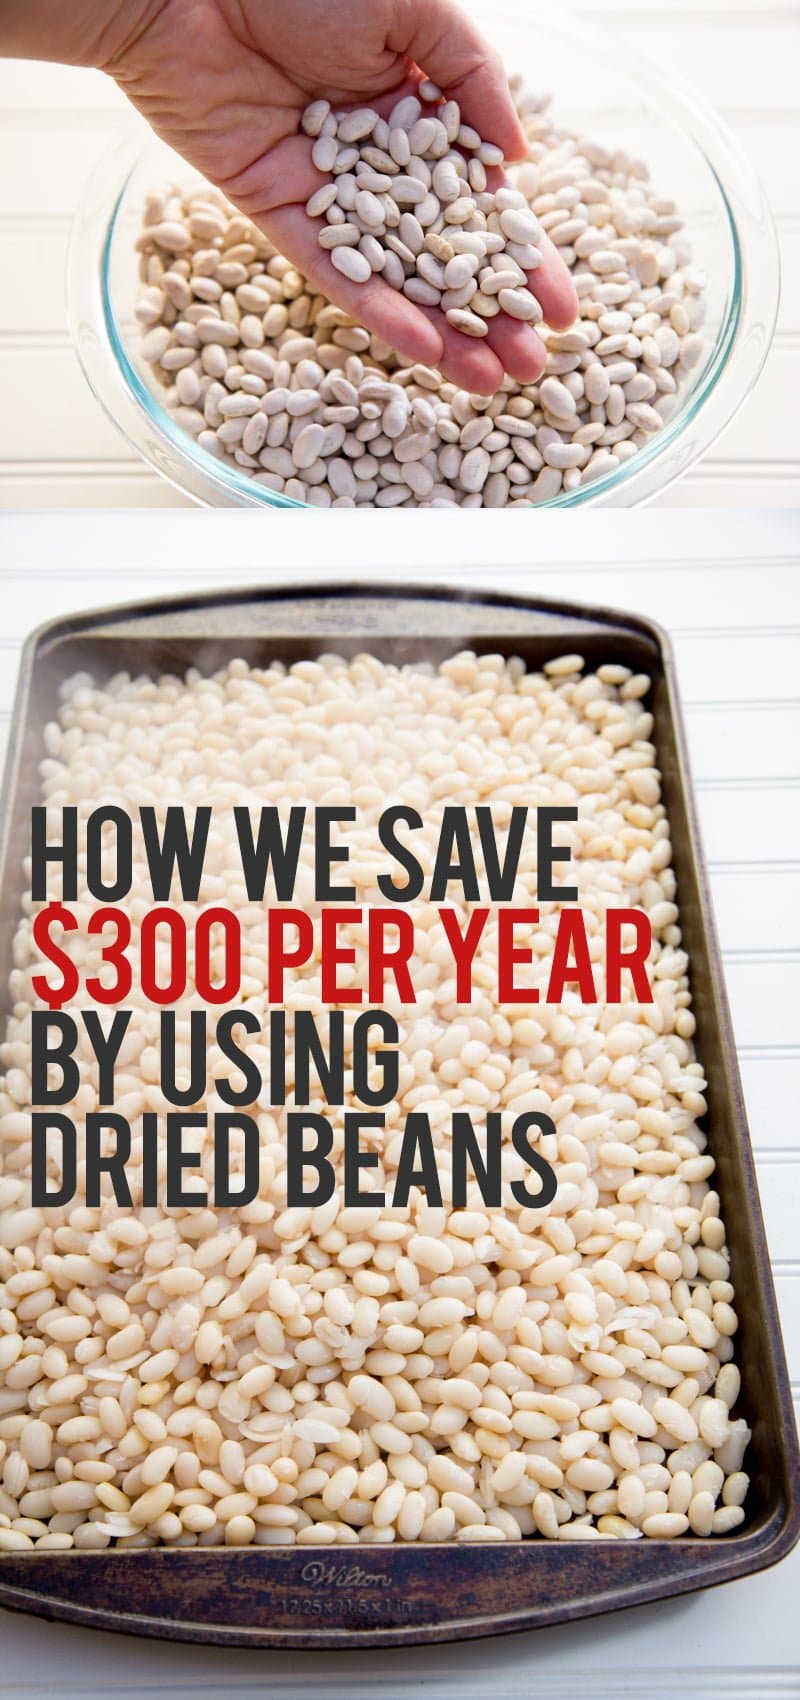 How We Save $300 Per Year By Using Dried Beans